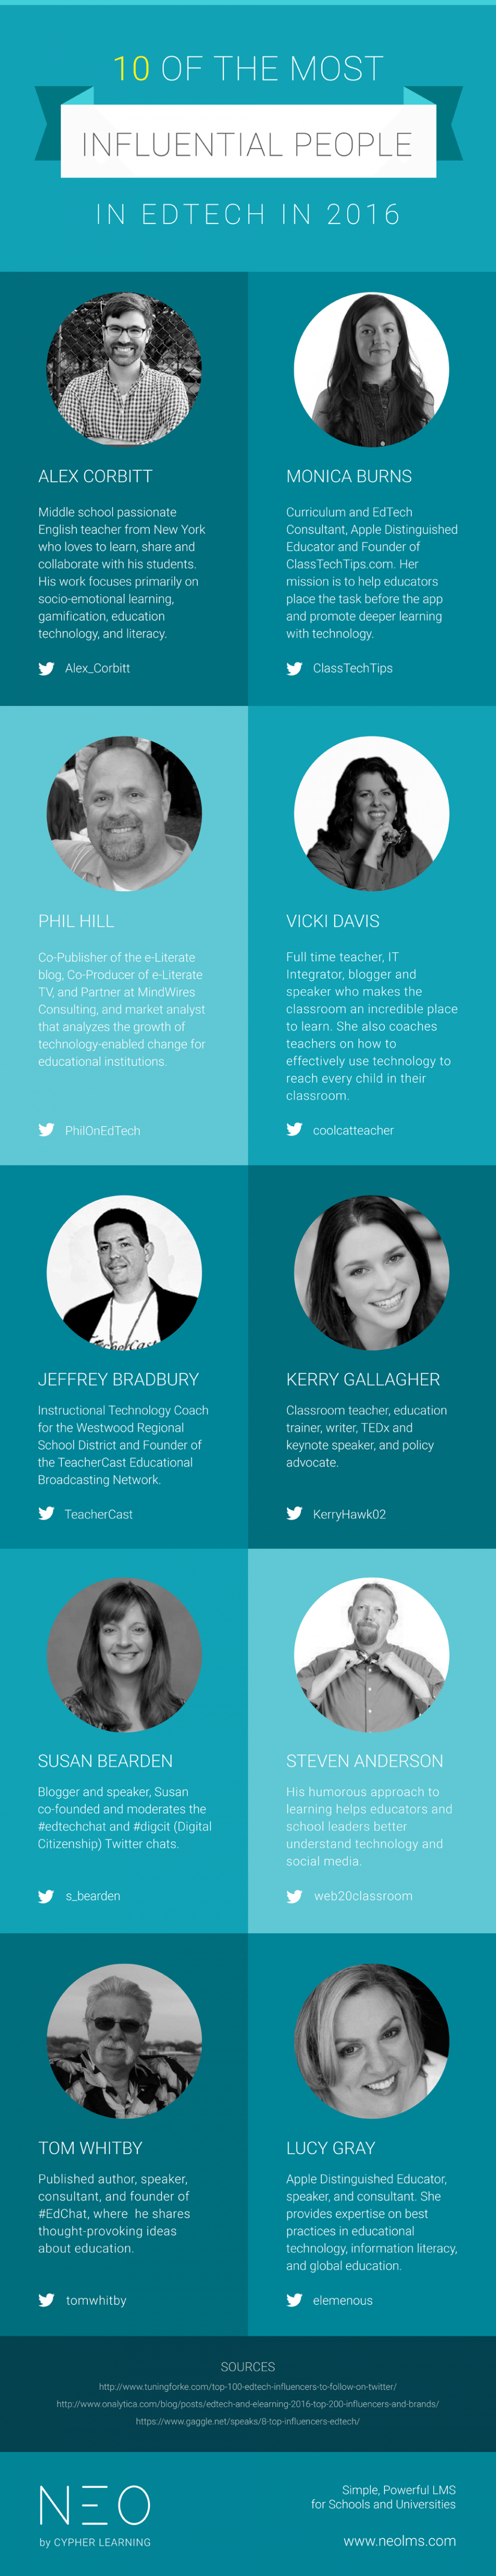 10 Most Influential People in EdTech in 2016 Infographic